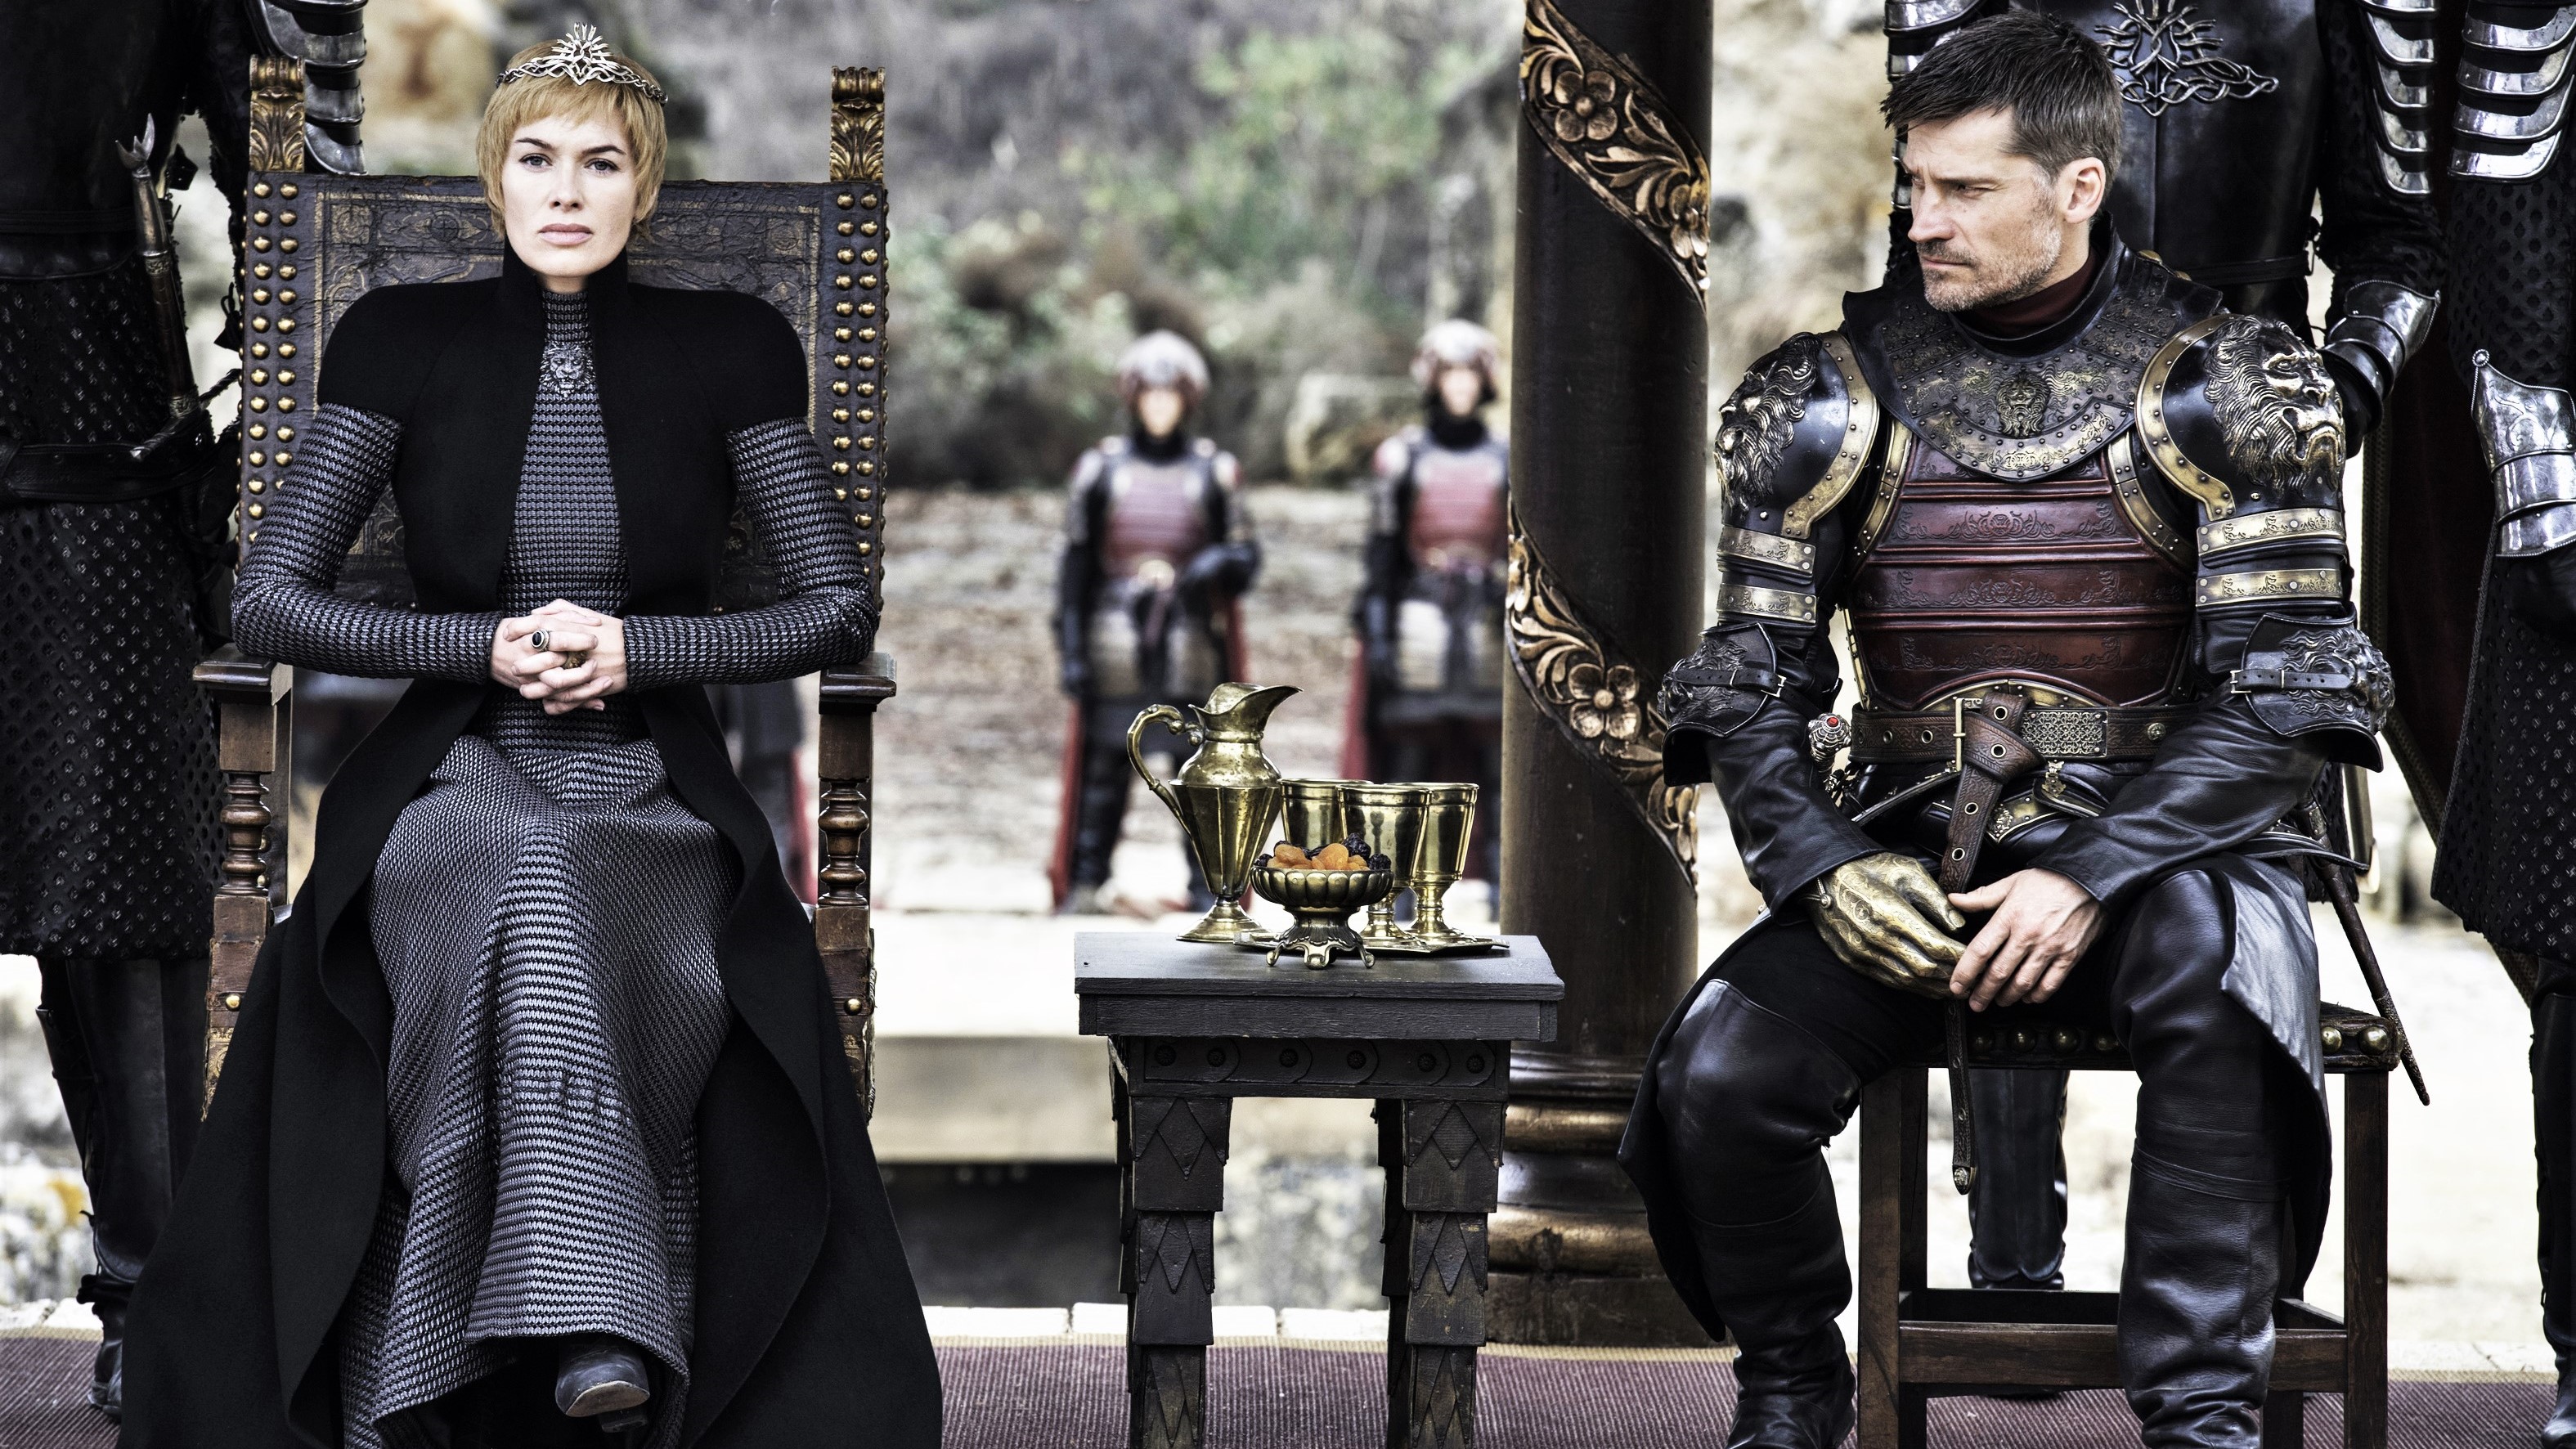 Which Game Of Thrones House Am I? Cercei and Jaime Lannister